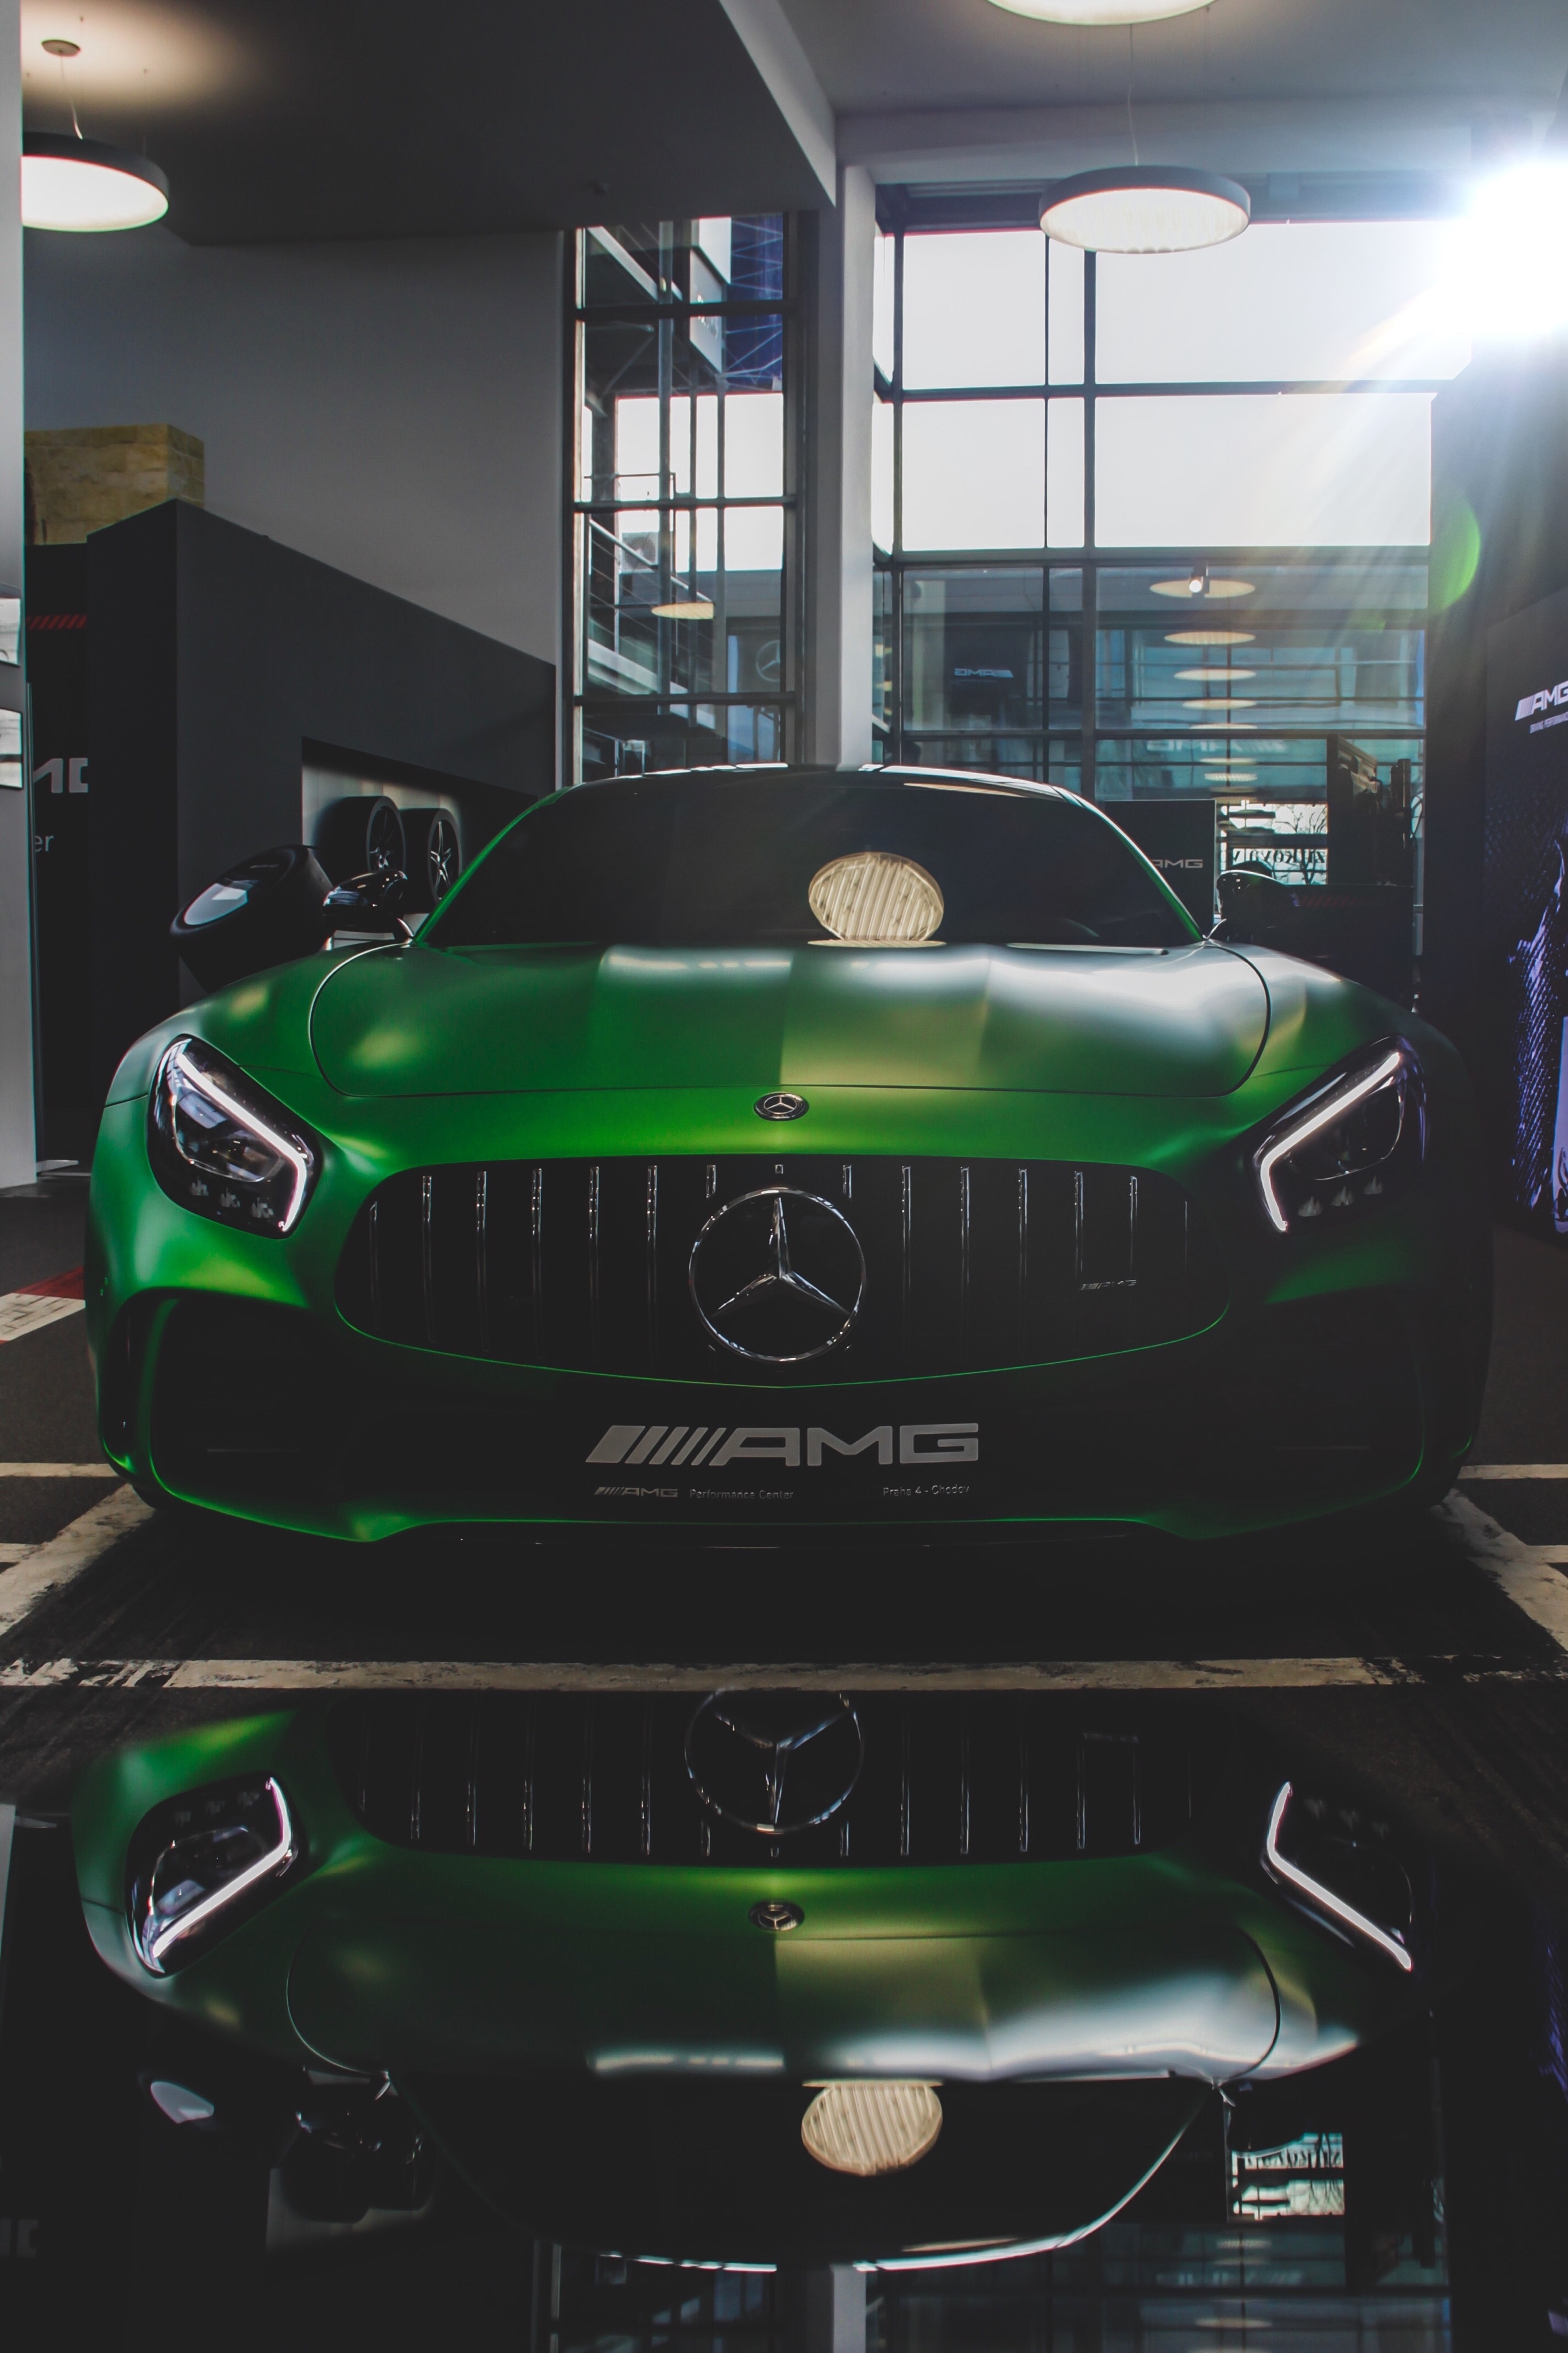 mercedes, mercedes amg, cars, green, front view